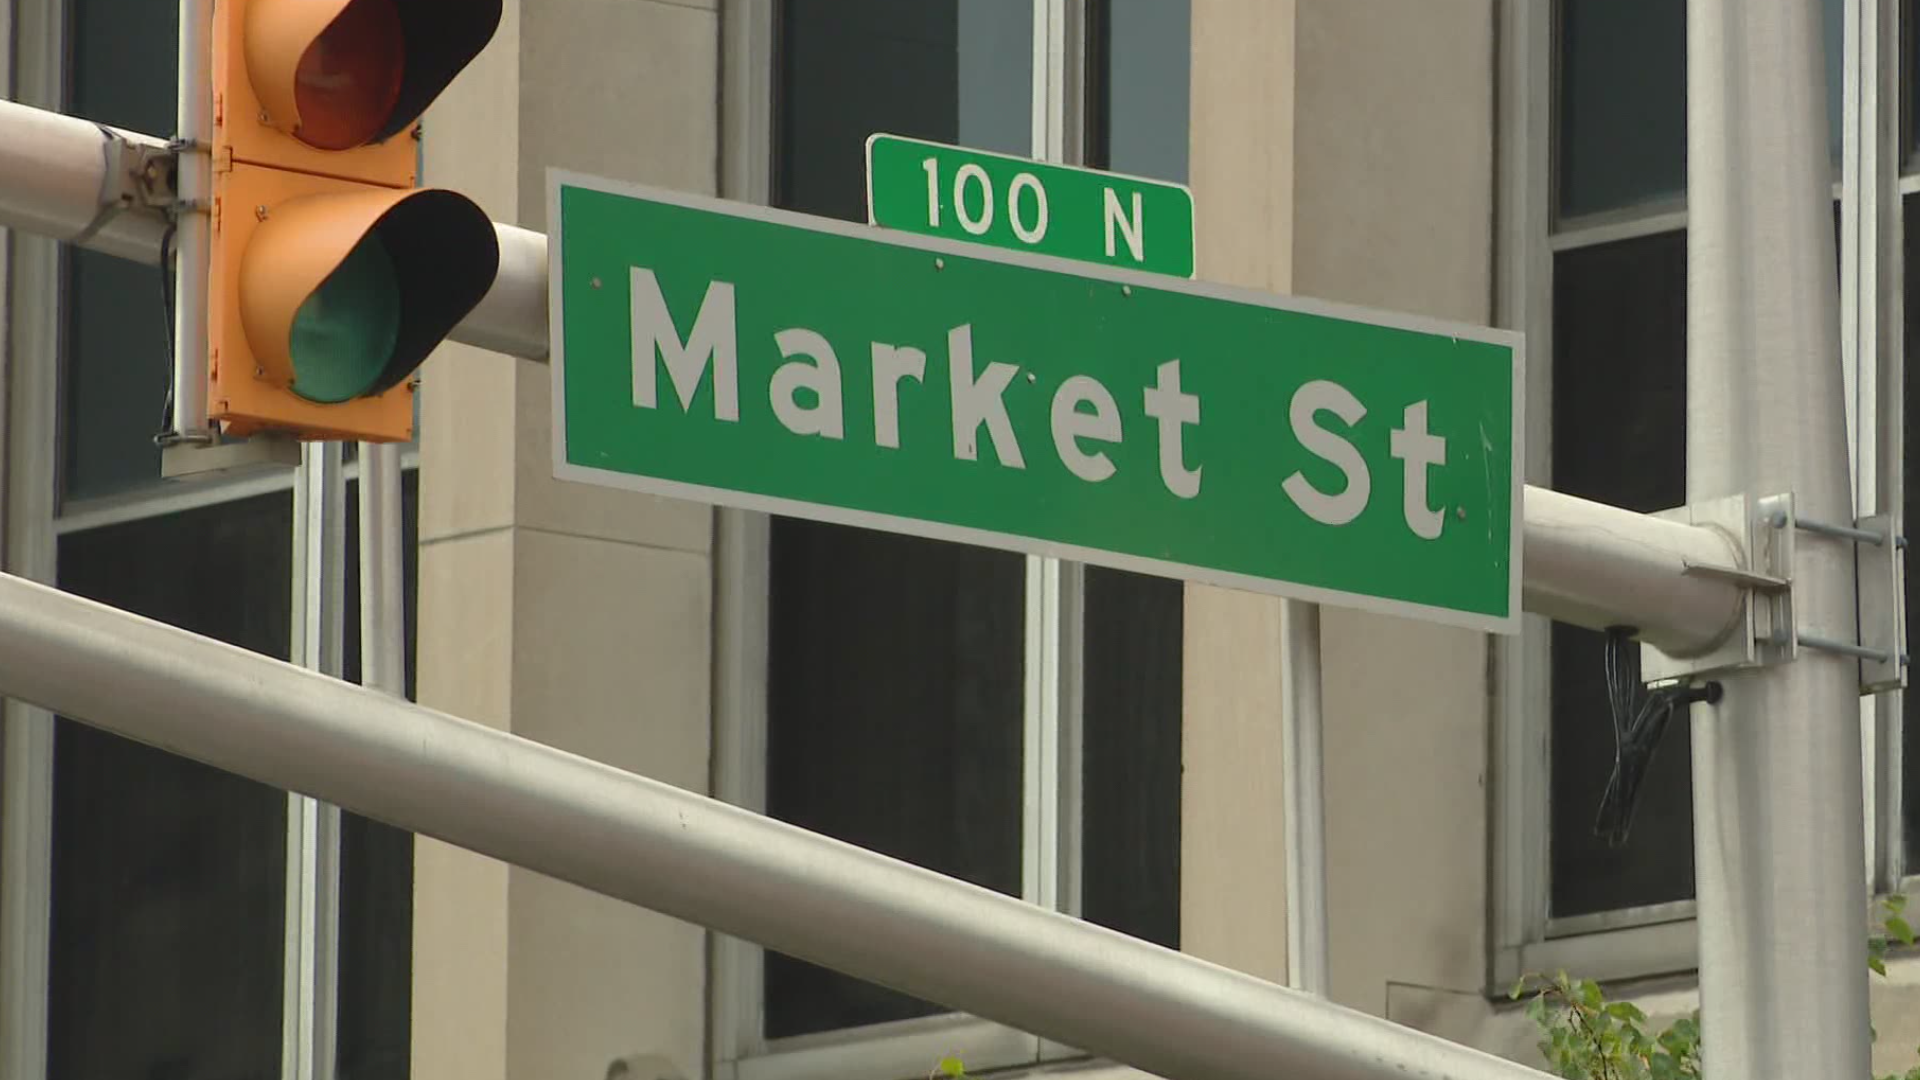 Starting Tuesday, East Market Street downtown will be closed between Delaware and Alabama streets.